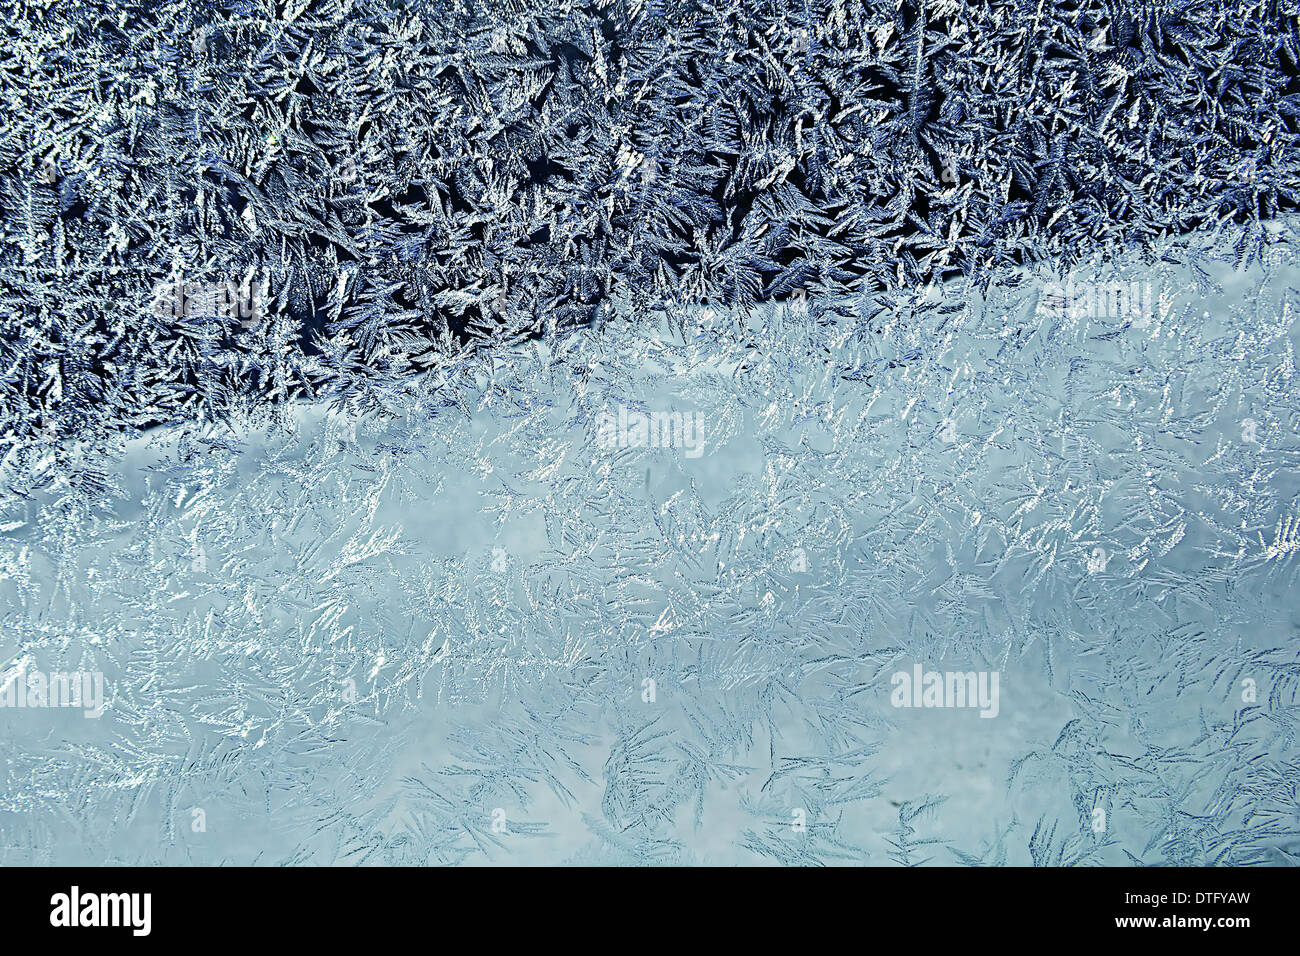 Icy pattern closeup in blue colors Stock Photo